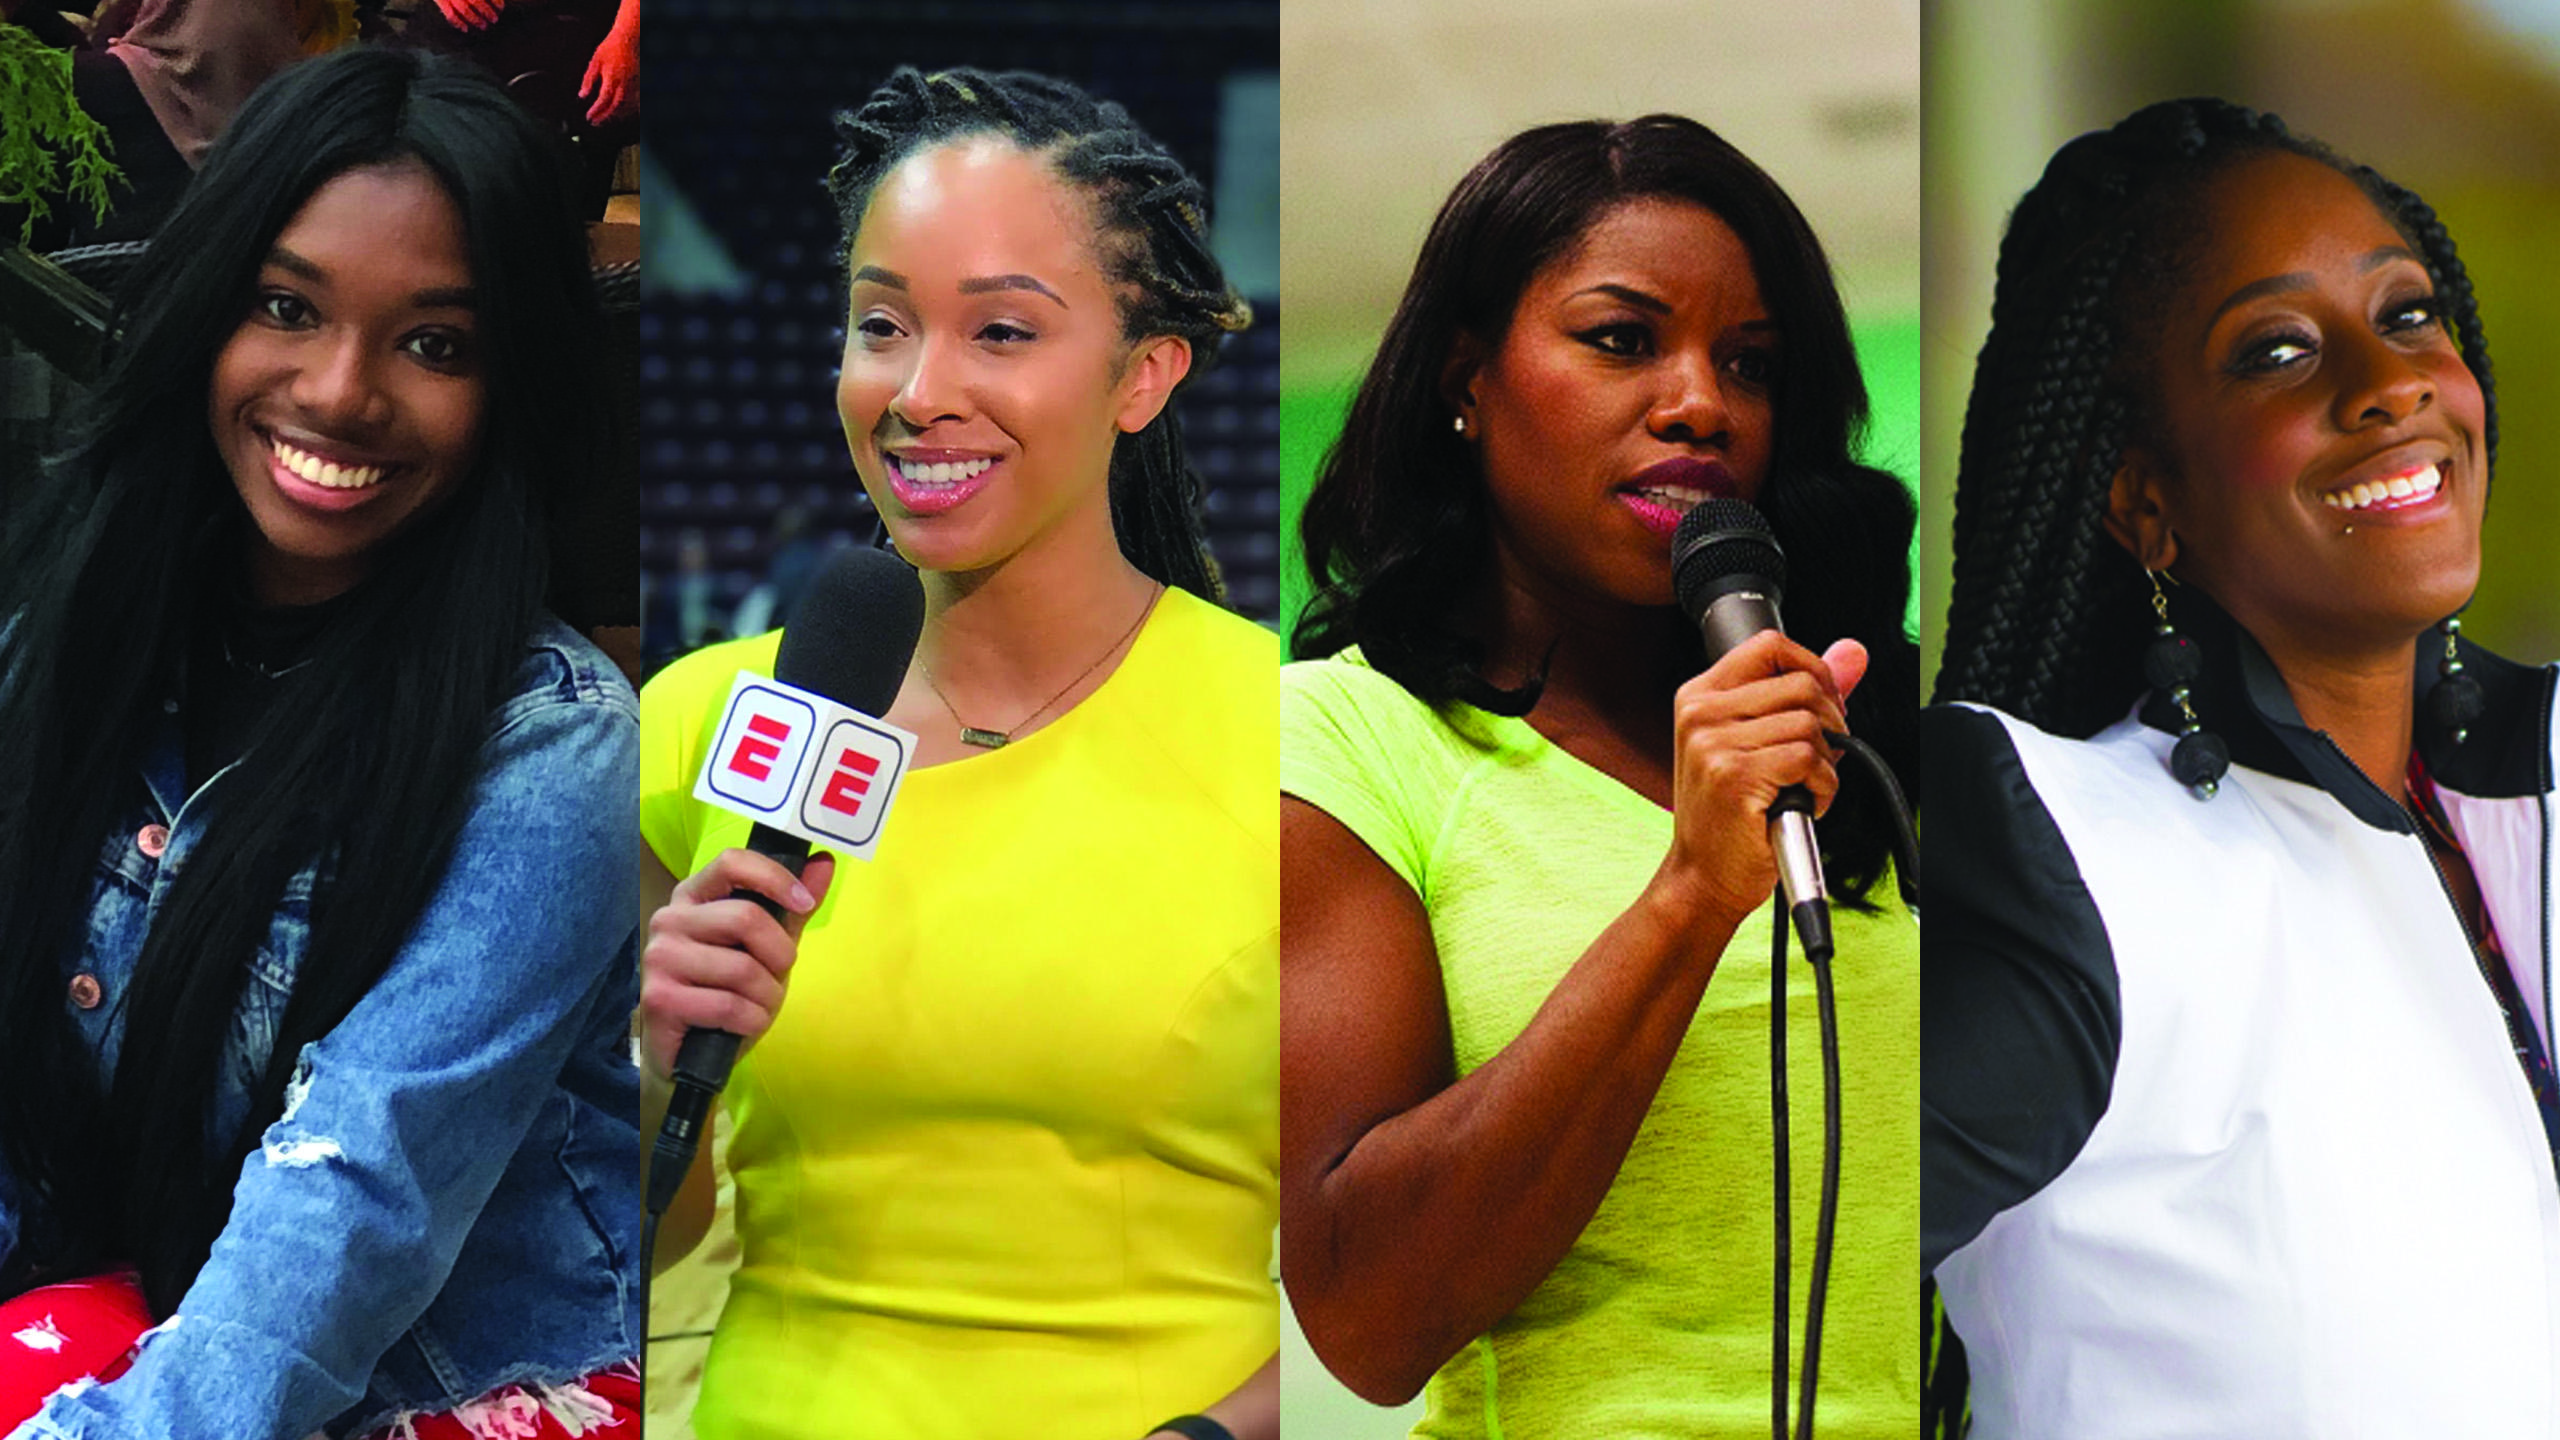 Portraits of four young Black women: Vanessa Wright, Meghan McPeak, Perdita Felicien and Tabia Charles-Collins.